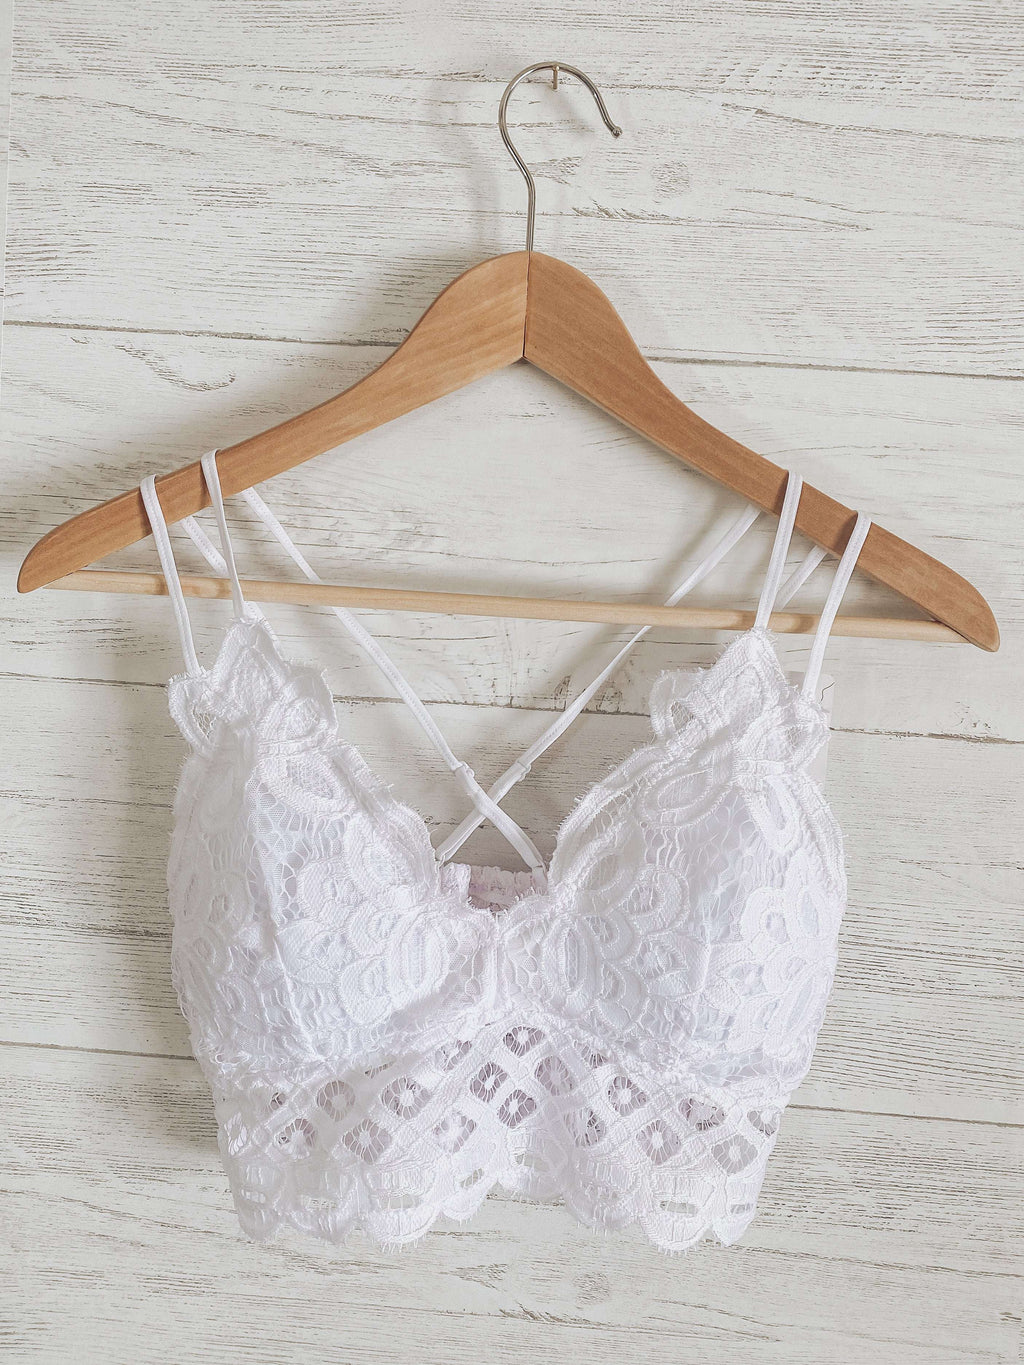 Buy Cami Bra For Women Lace online